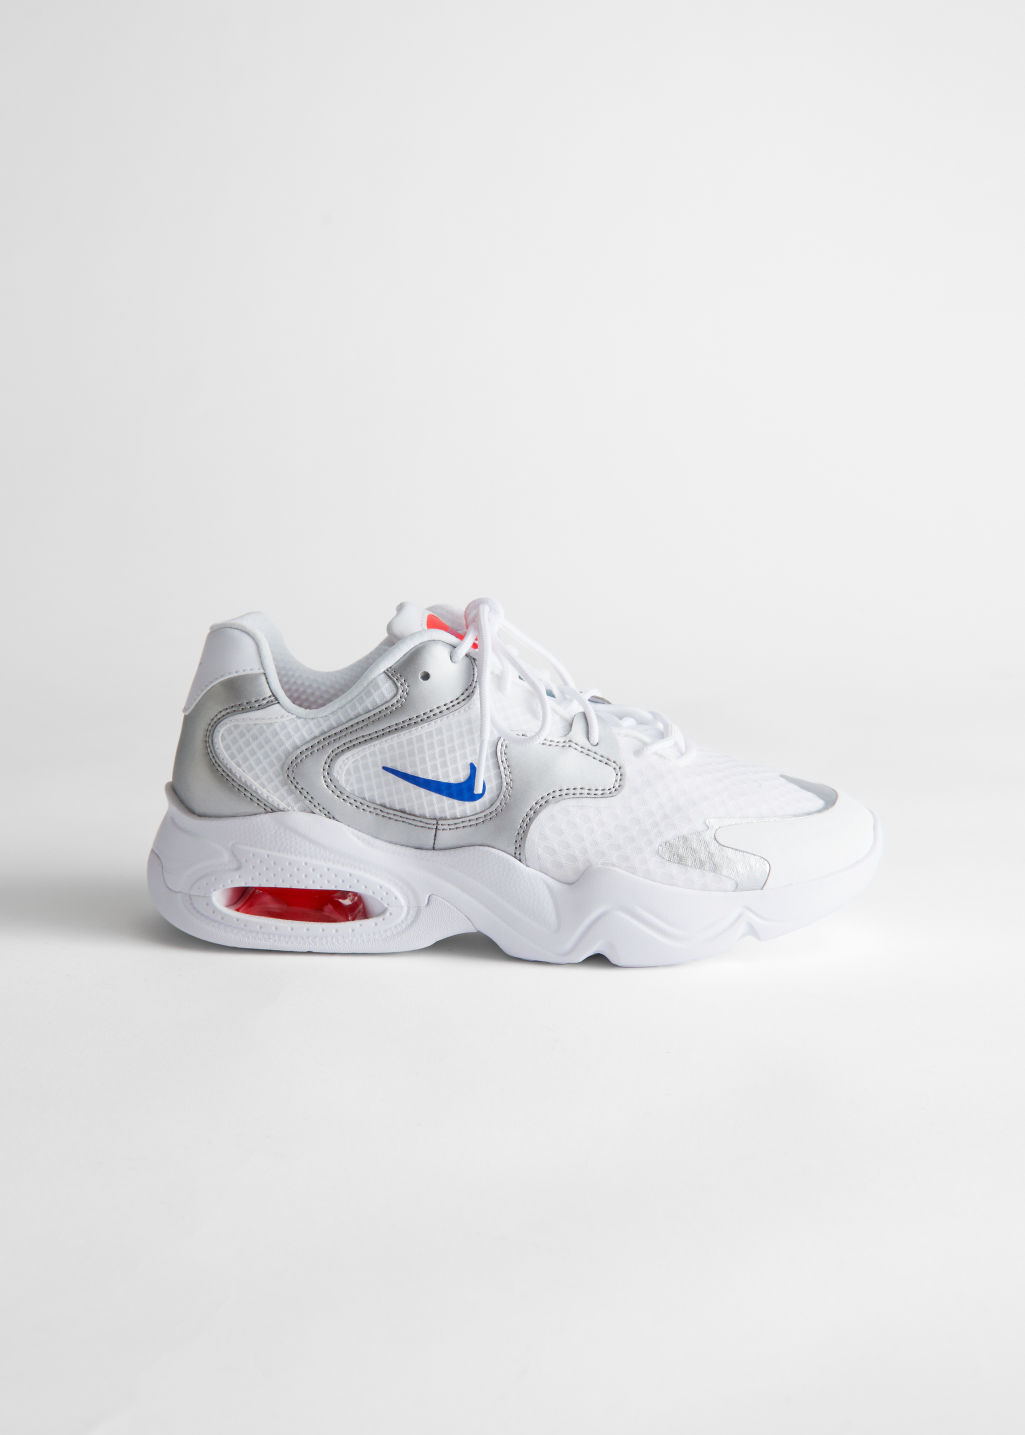 Nike Air Max X2 - Red, Blue, White - Nike - & Other Stories